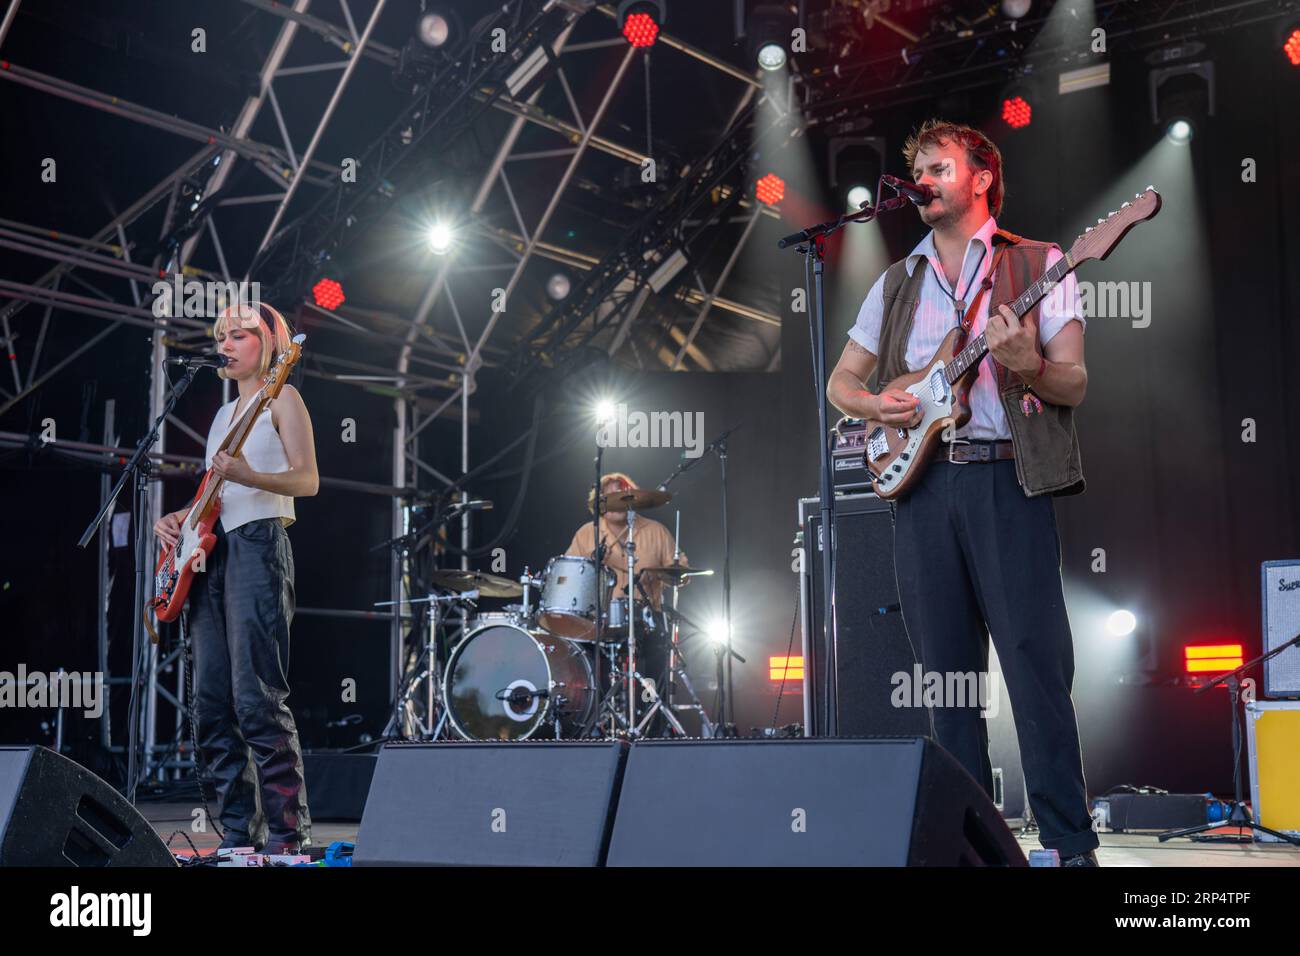 Dorset, UK. Sunday, 3 September, 2023. Divorce performing at the 2023 edition of the End of the Road festival at Larmer Tree Gardens in Dorset. Photo date: Sunday, September 3, 2023. Photo credit should read: Richard Gray/Alamy Live News Stock Photo